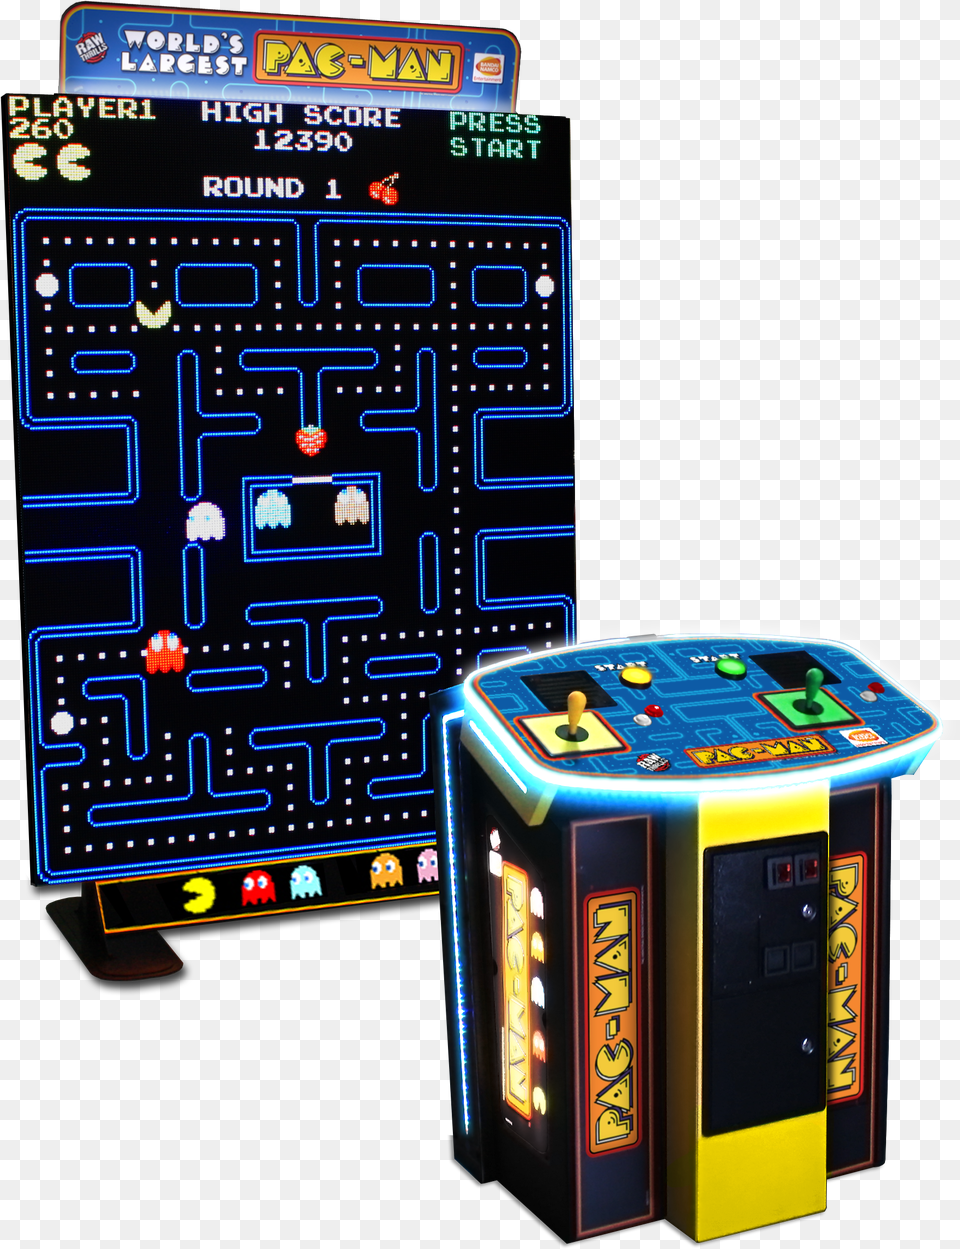 Sign Up To Join The Conversation World39s Largest Pac Man Arcade, Scoreboard Png